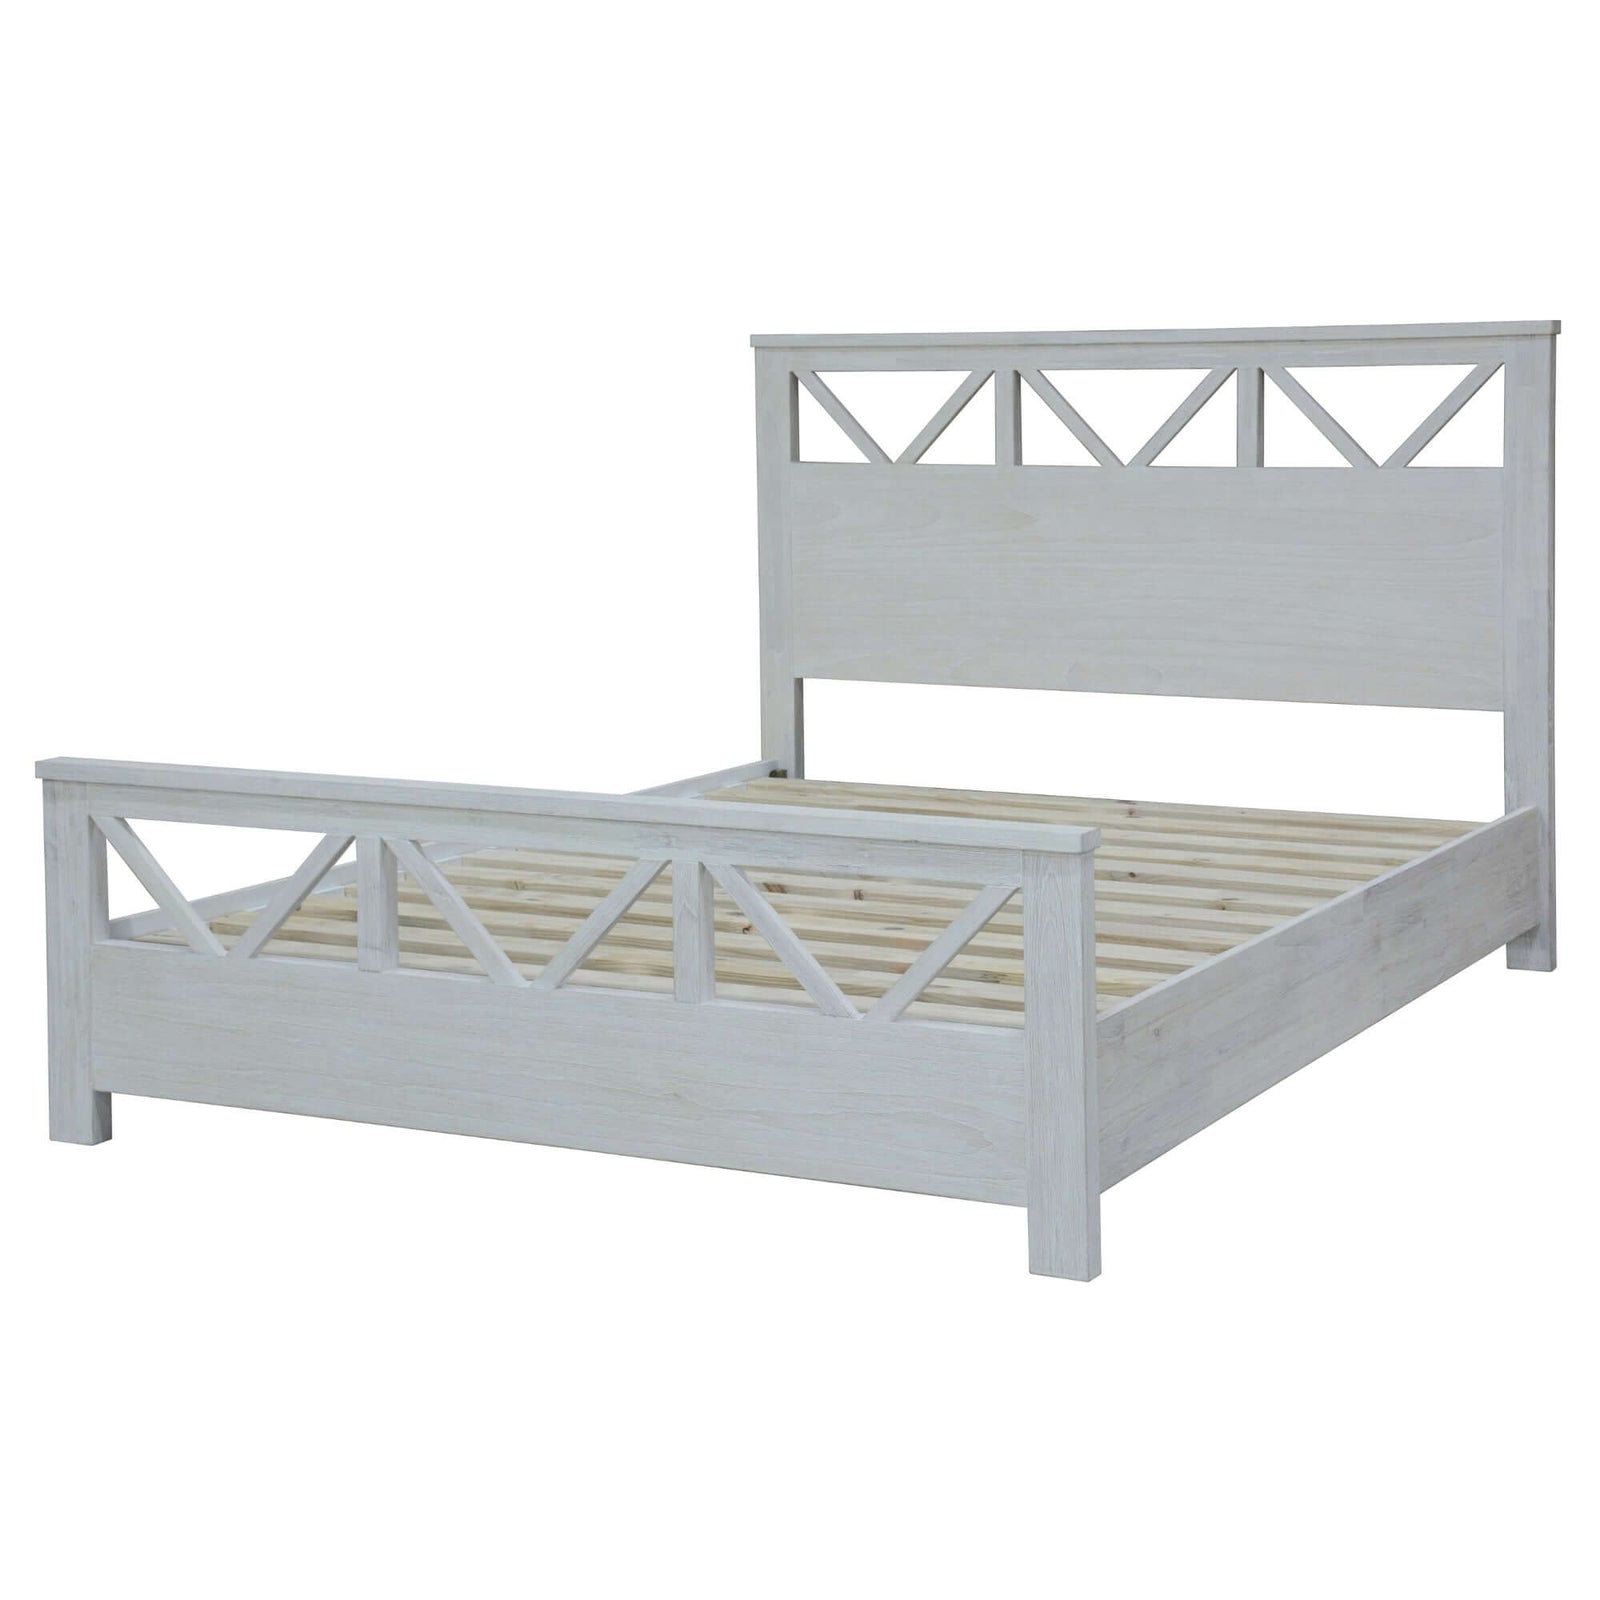 Myer Double Size Bed Frame Solid Timber Wood Mattress Base White Wash-Upinteriors